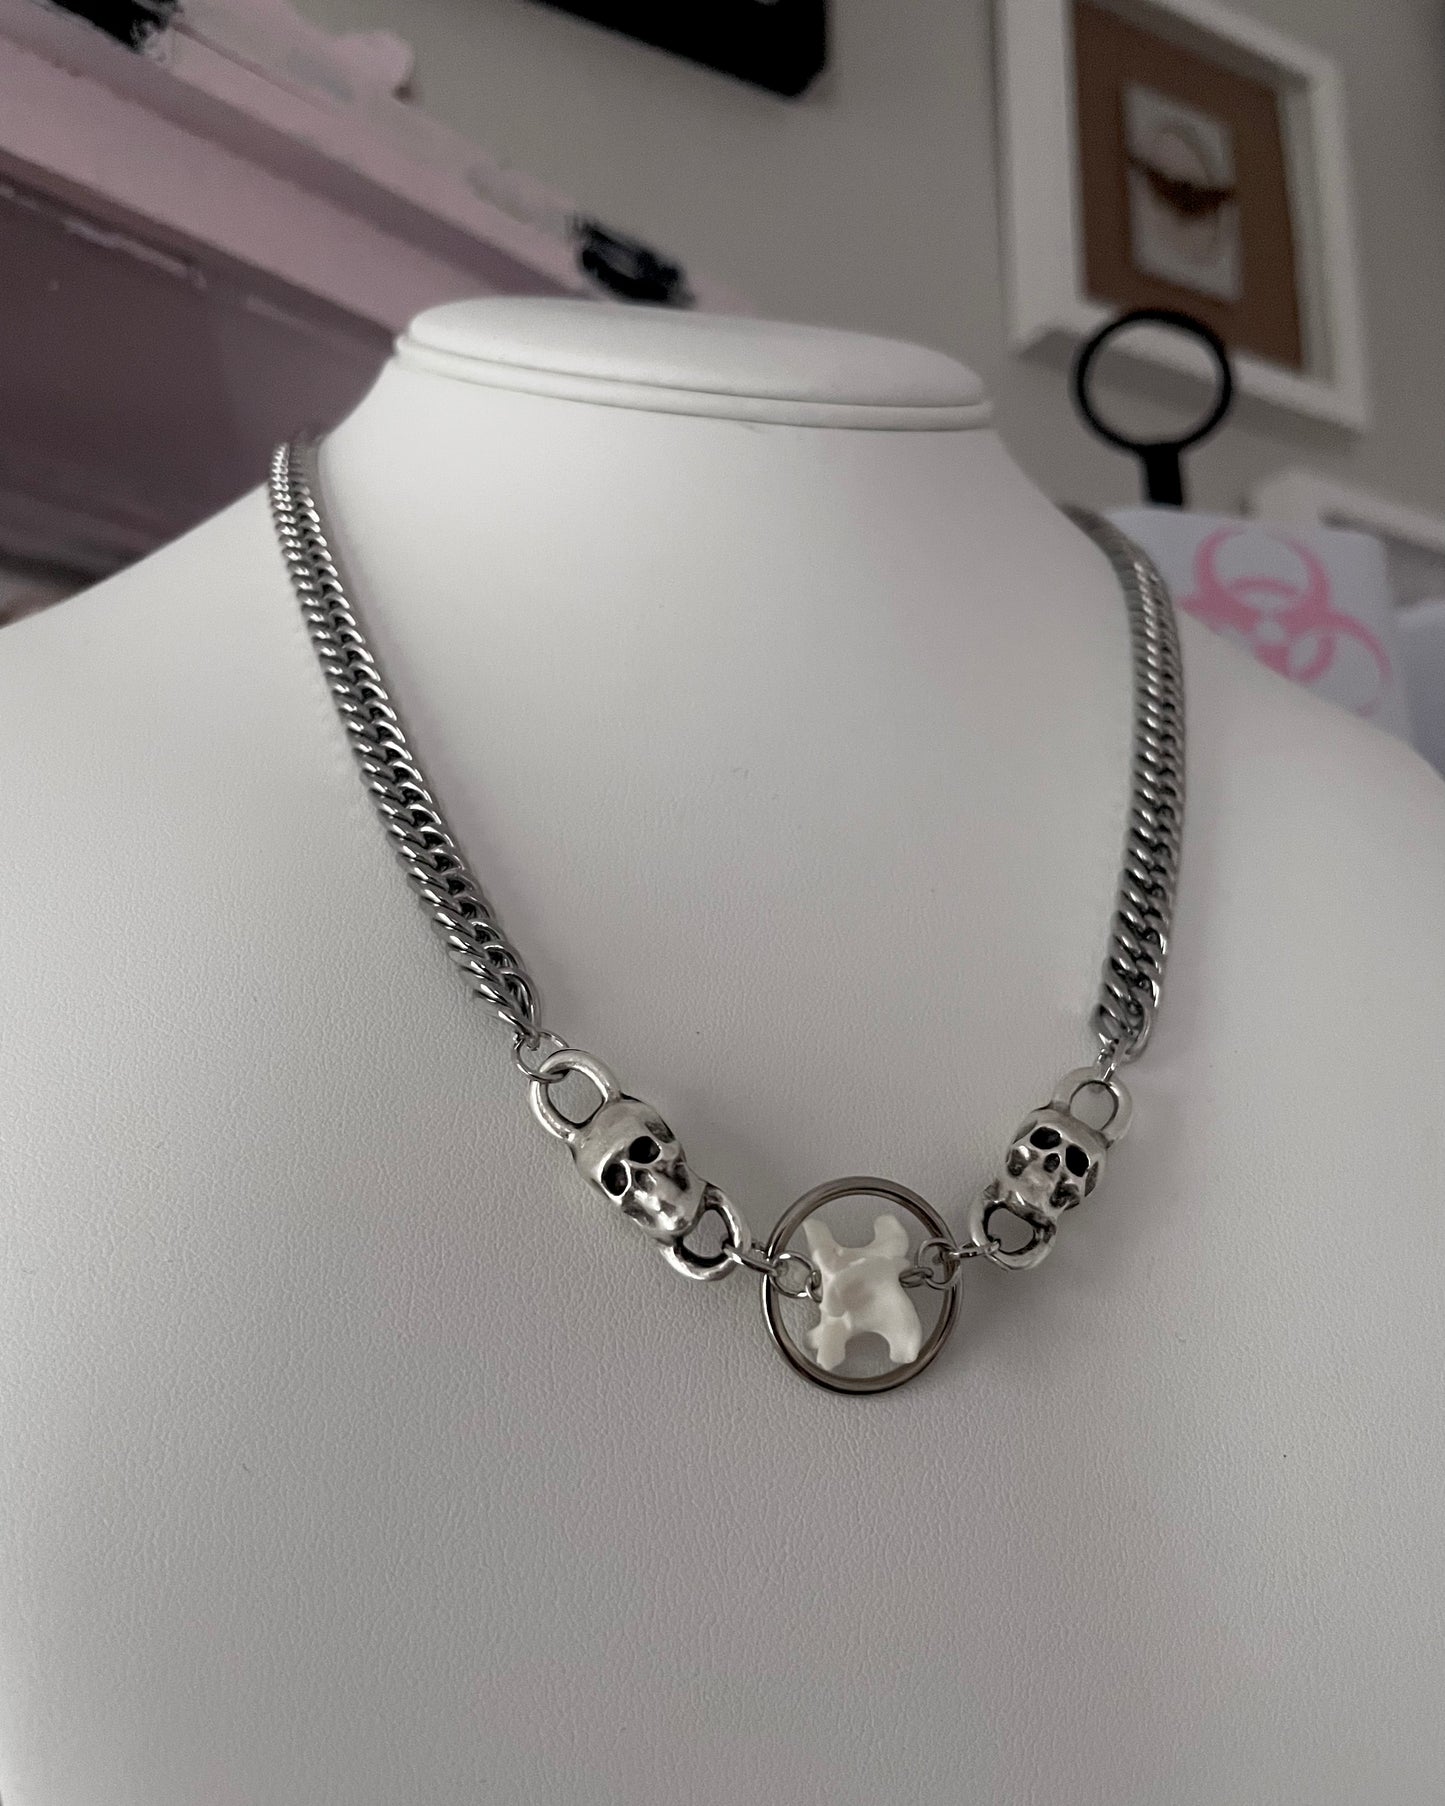 "𝕷𝖔𝖗𝖆𝖑𝖎𝖊" Necklace